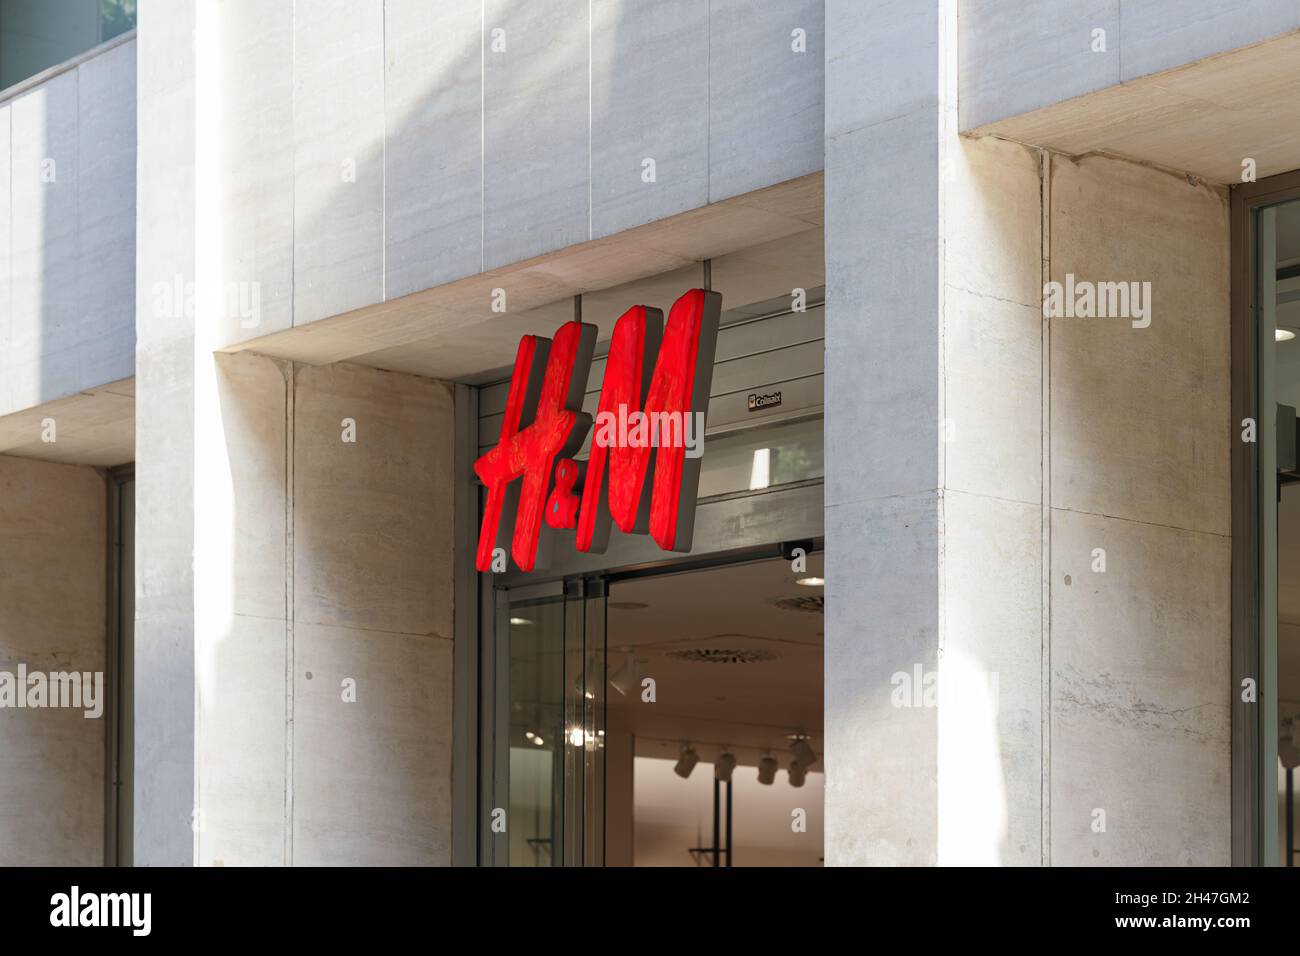 A H Logo Design High Resolution Stock Photography and Images - Alamy